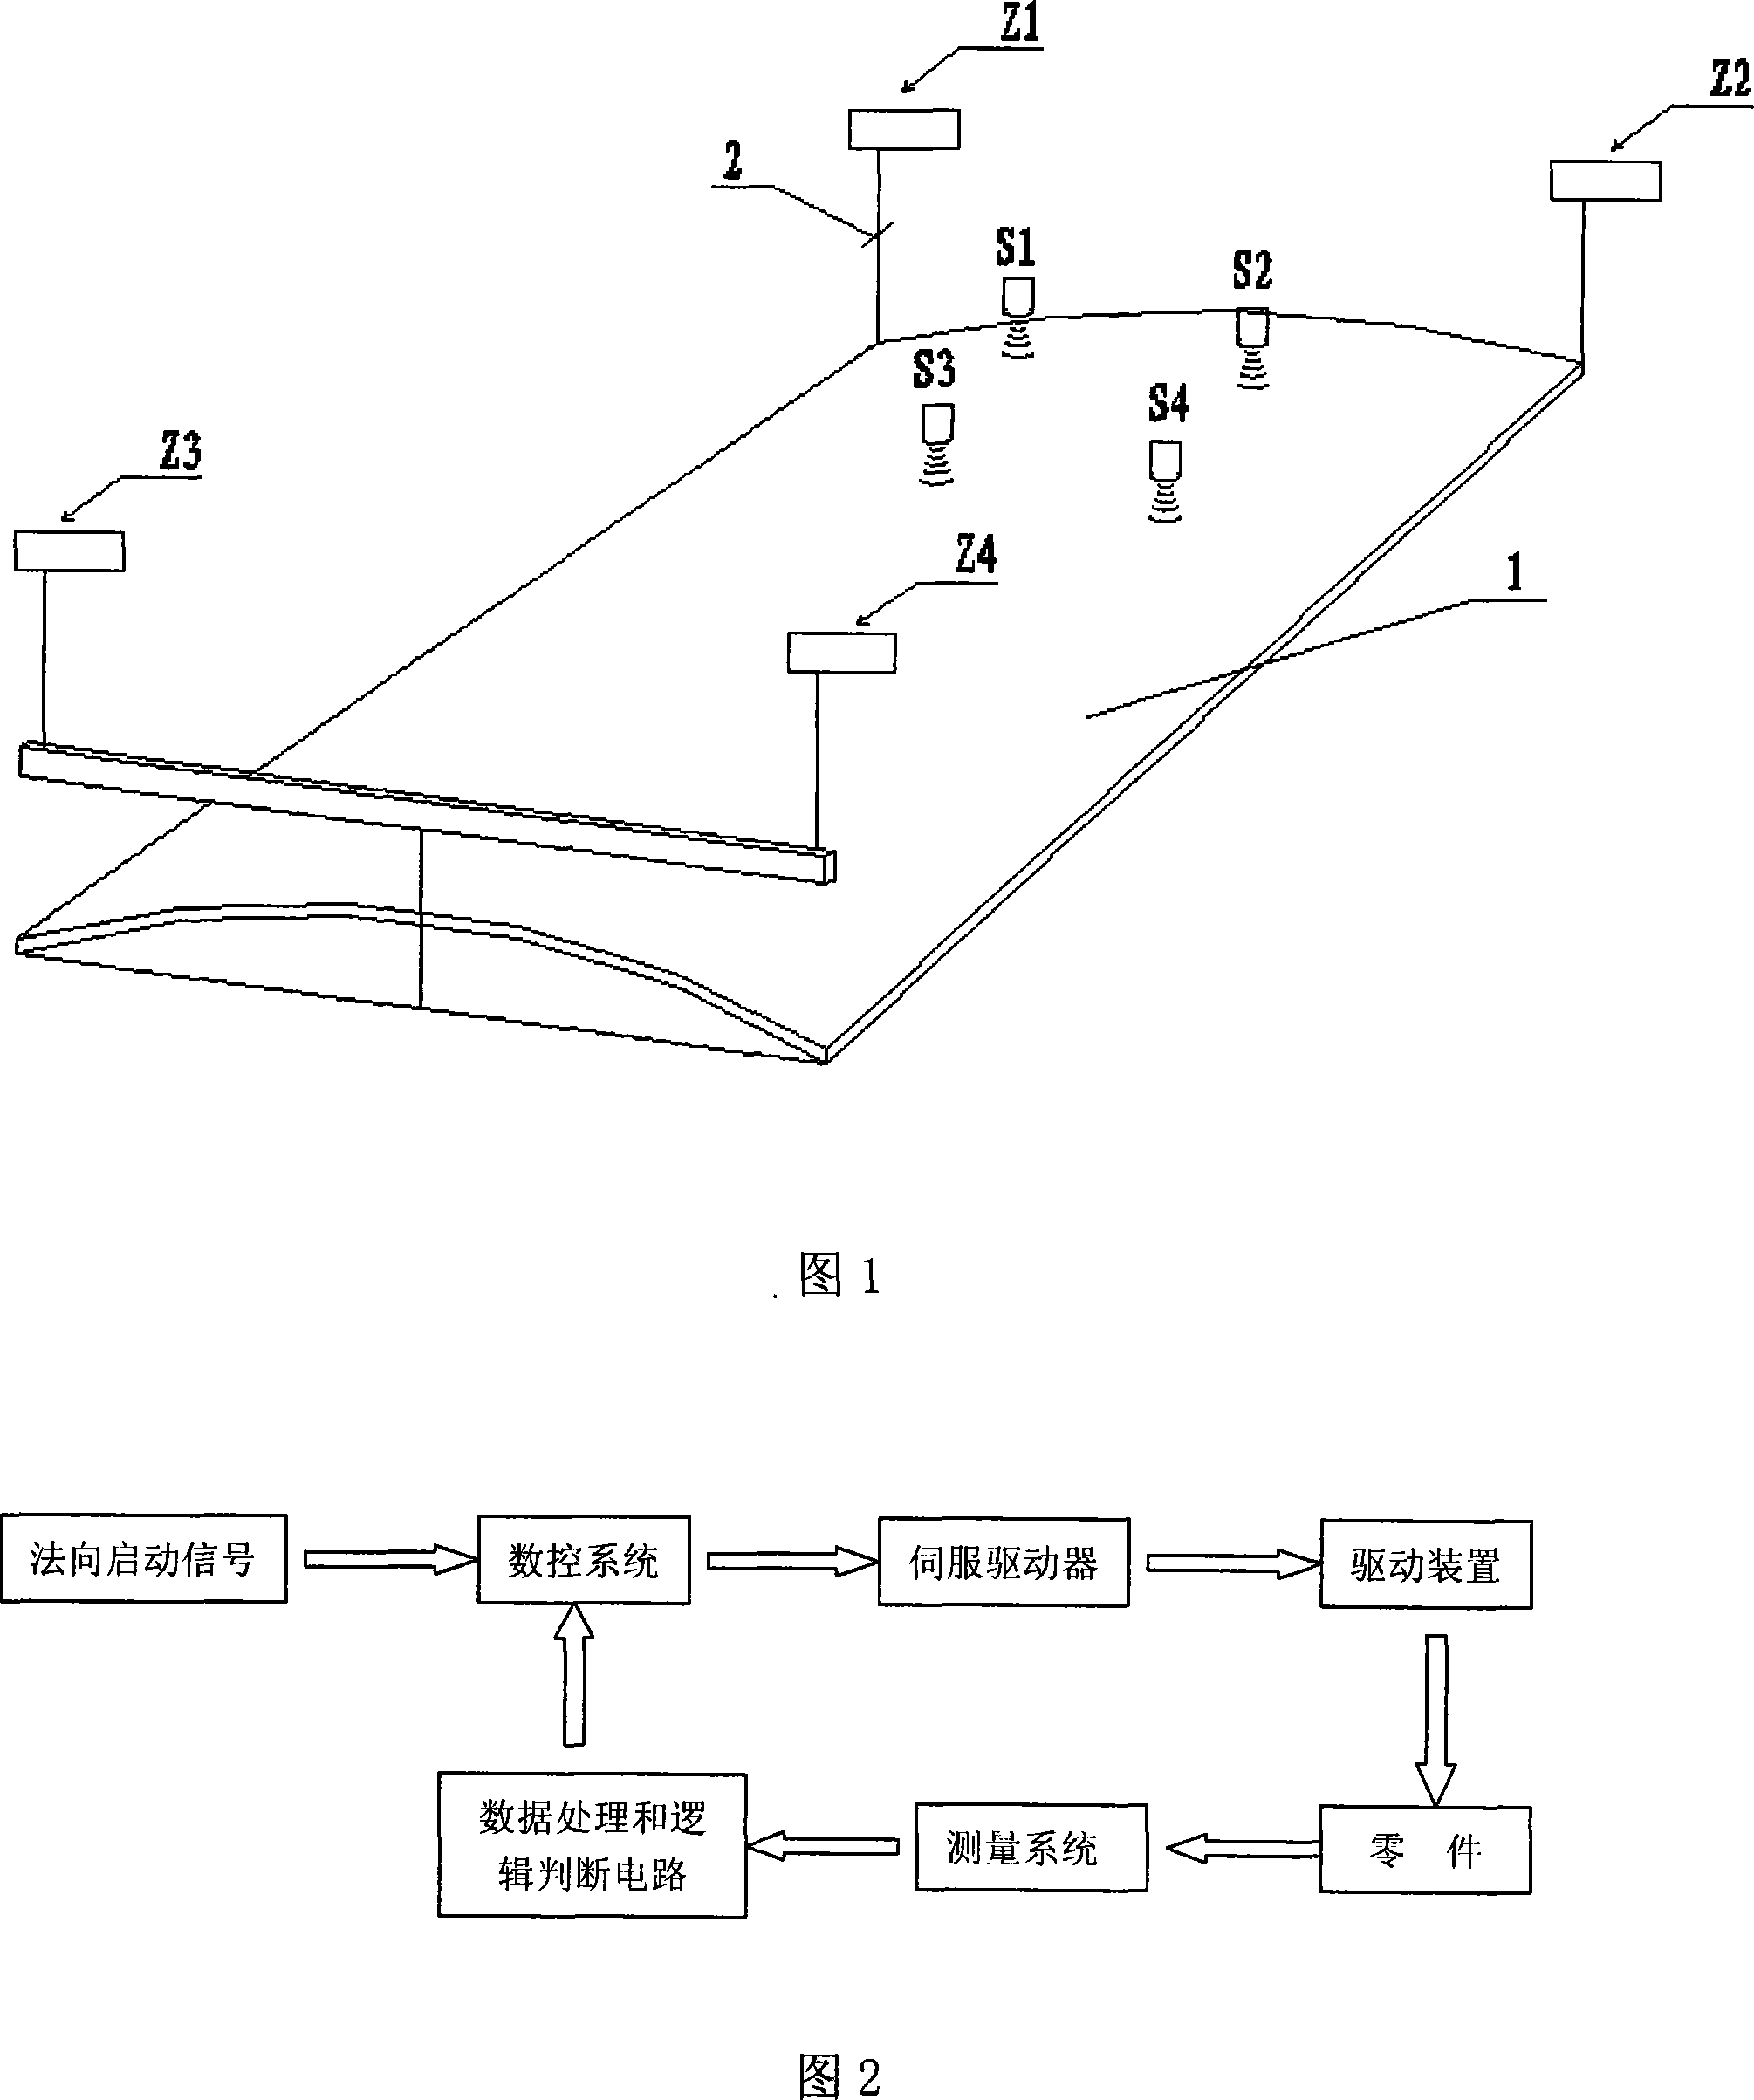 Control method for normally riveted curved member